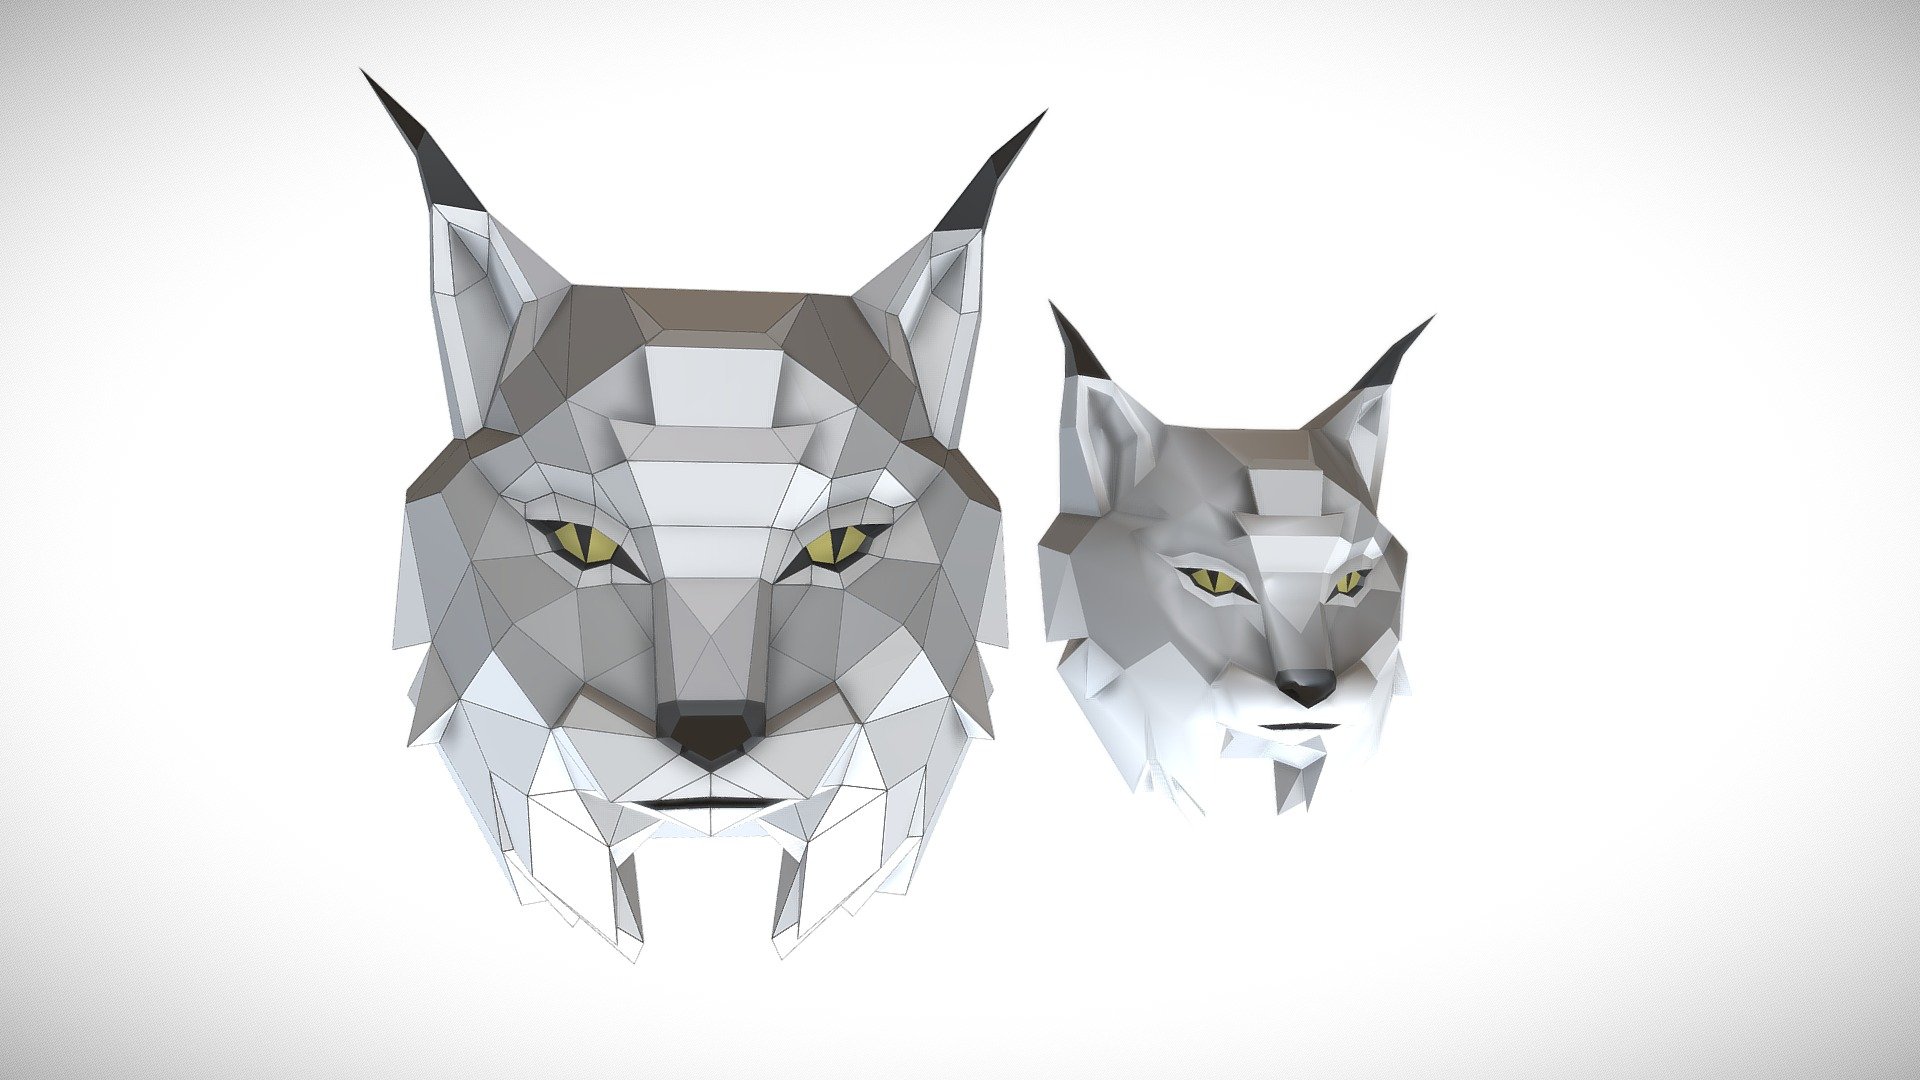 Wall head Trophy

Low poly Trophy Lynx - Great for printing on a 3D printer.

The trophy will decorate any wall.

Fans of papercraft models do not pass by, unfold your model in the right

size and collect it from paper or sew a toy!

This model is also suitable for lovers of minimalism in interiors.

323 Polys

273 Verts

Archive include:

.max 2011 .stl .obj .3ds .WRL .fbx

You can print this models on 3d printer or use in design interior, or make paper model with Pepakura - Lynx - 3D model by PAPERstuff (@Vitaly..Voronov) 3d model